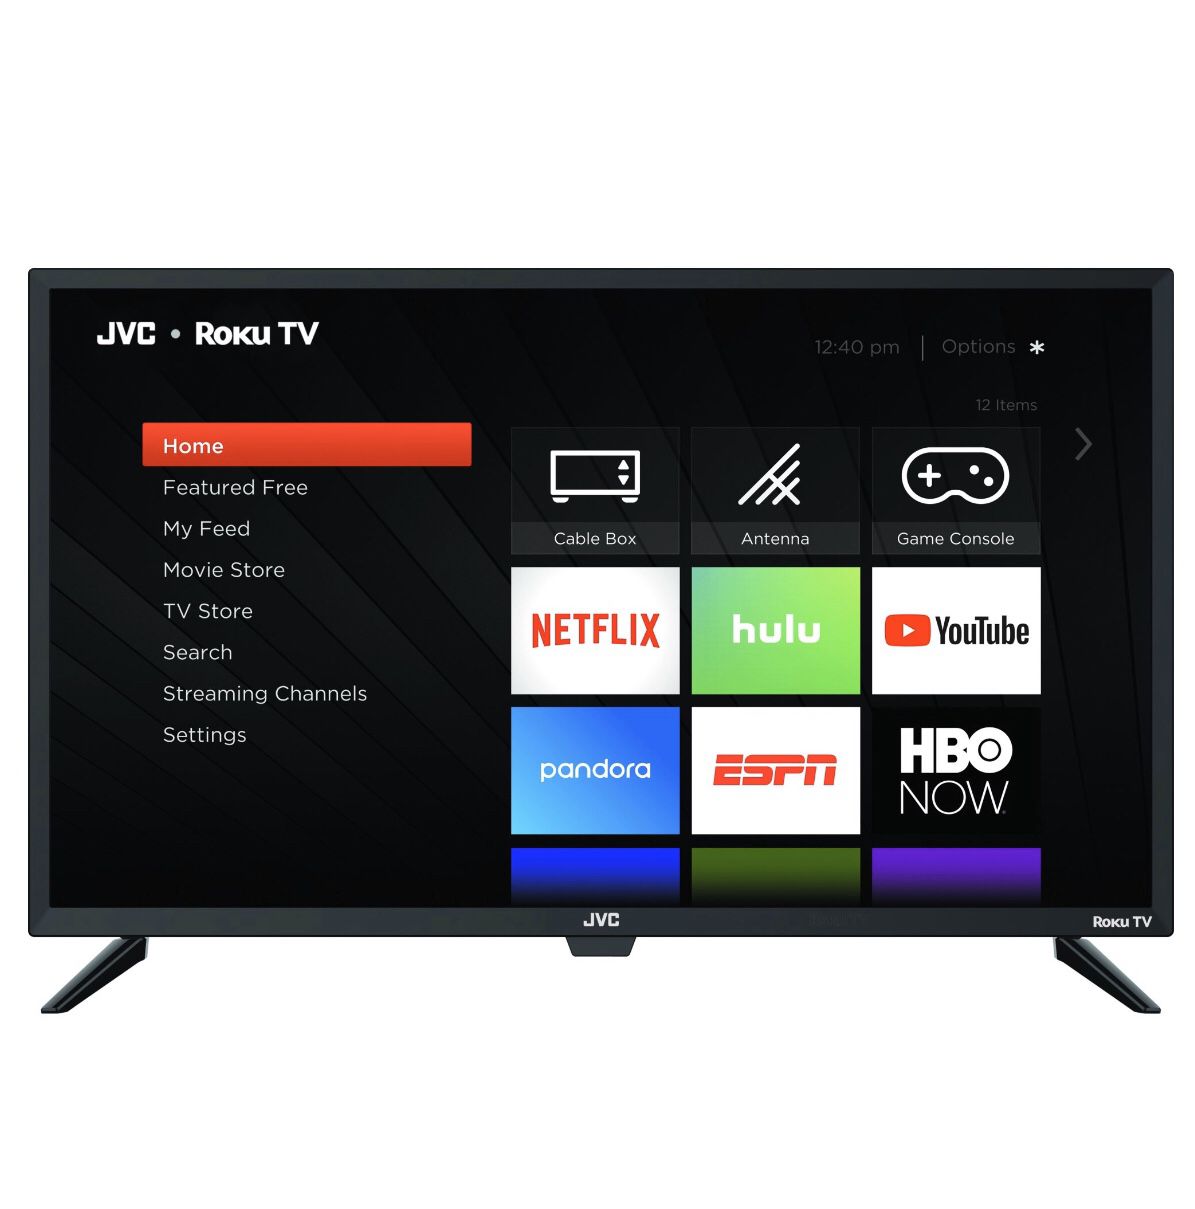 Brand New JVC 49in smart TV with Roku 1080P